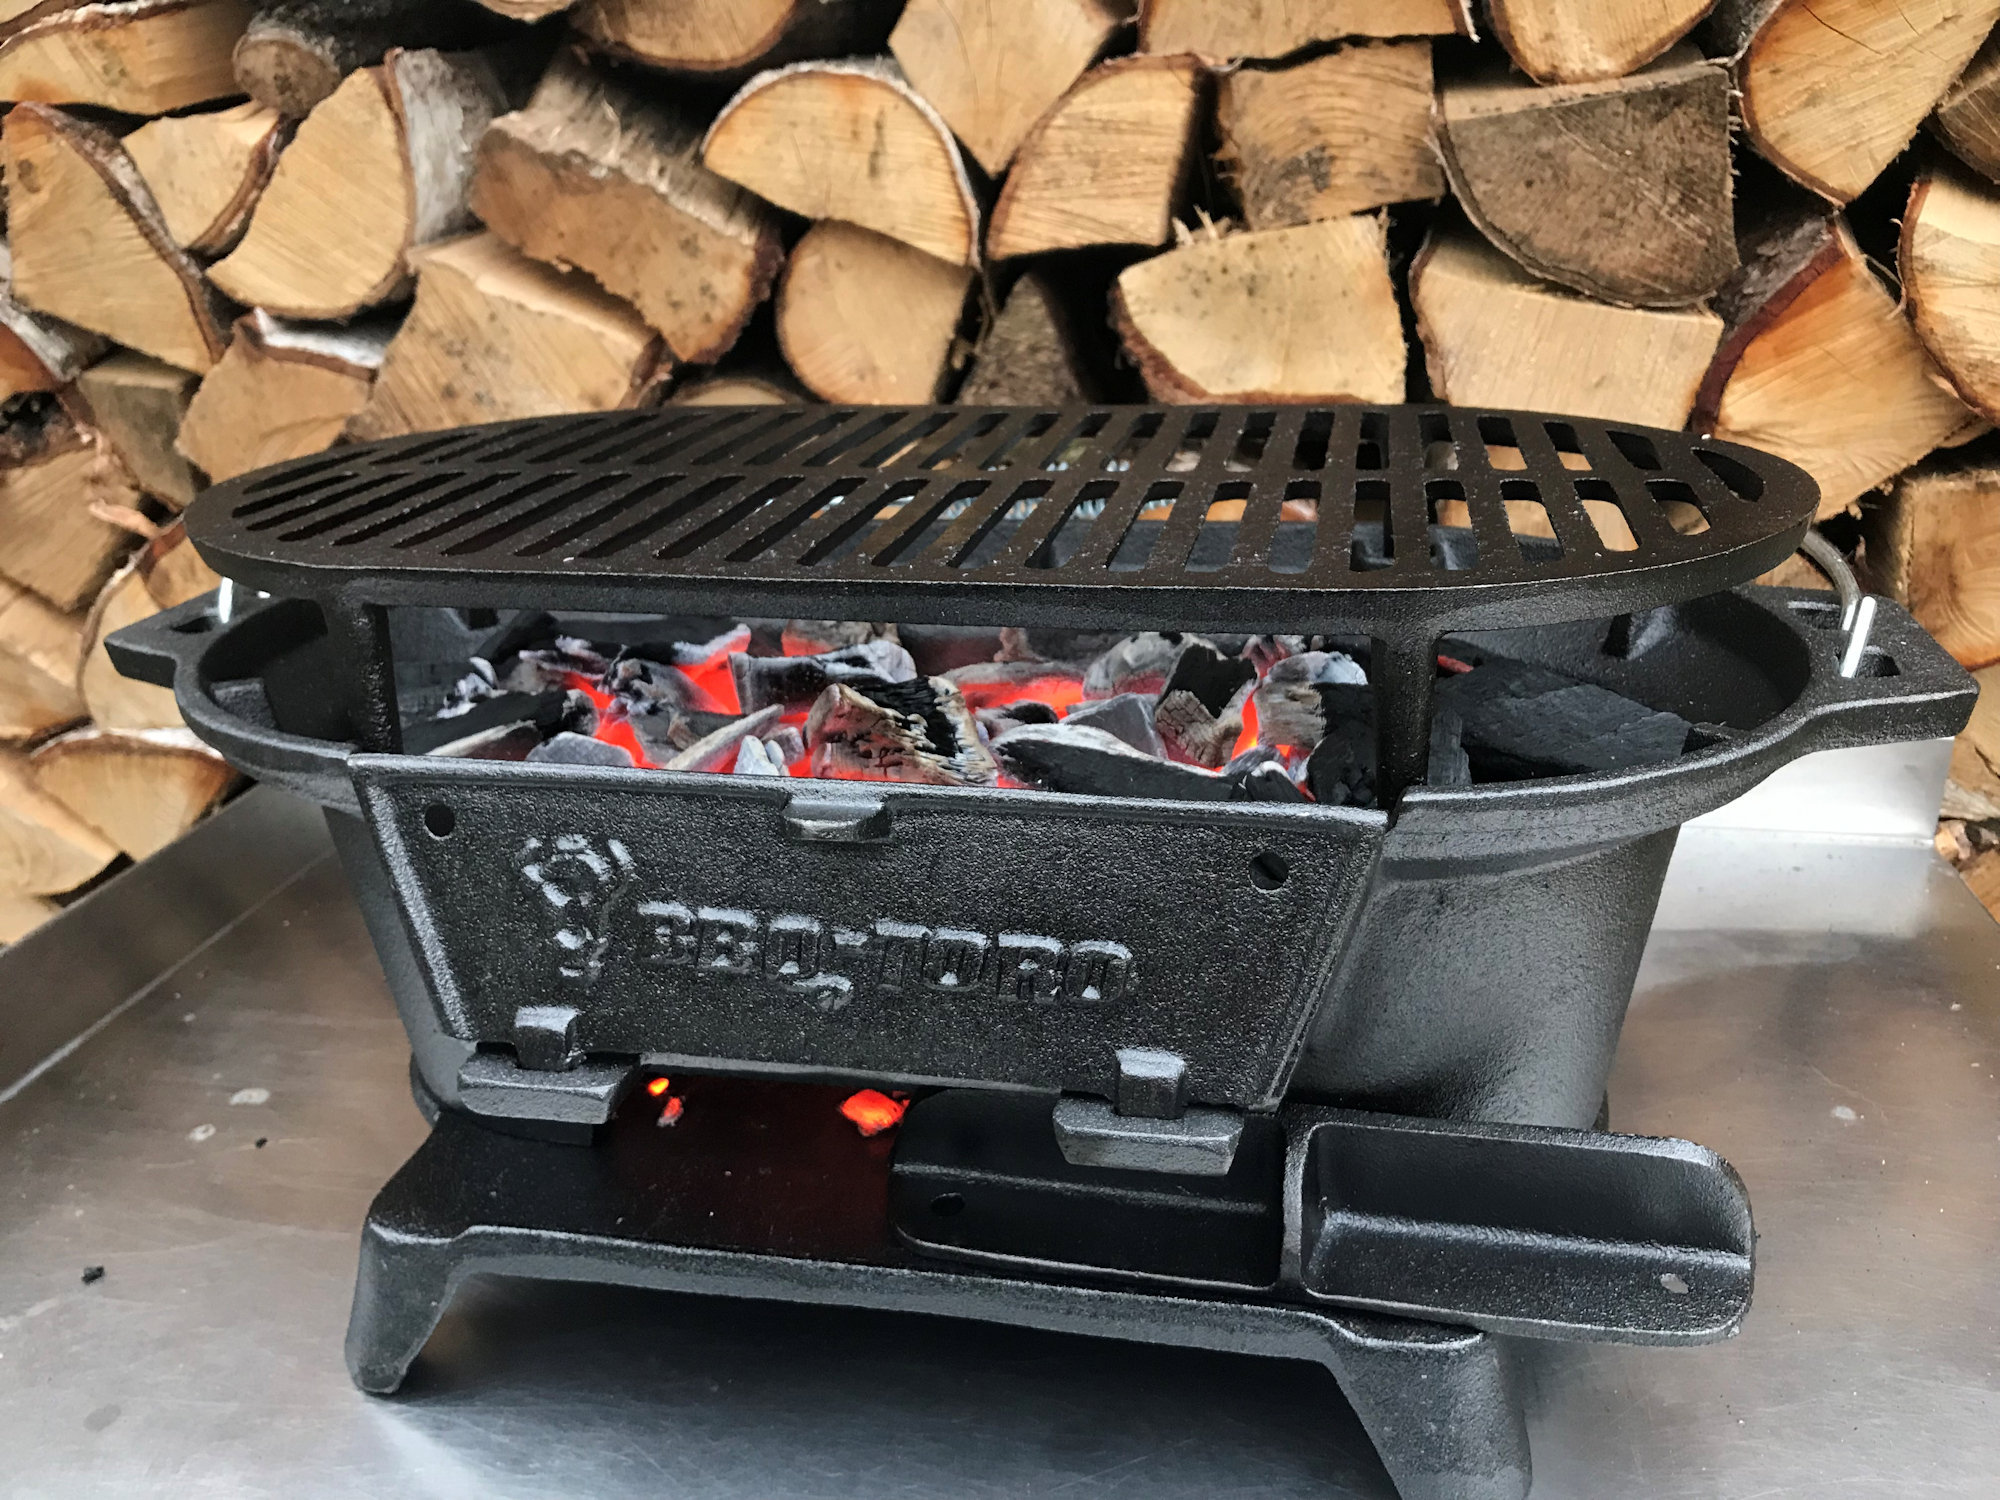 Holzkohle BBQ-Toro Grilltopf Campinggrill Gusseisen Grillrost Hibachi Style mit | eBay